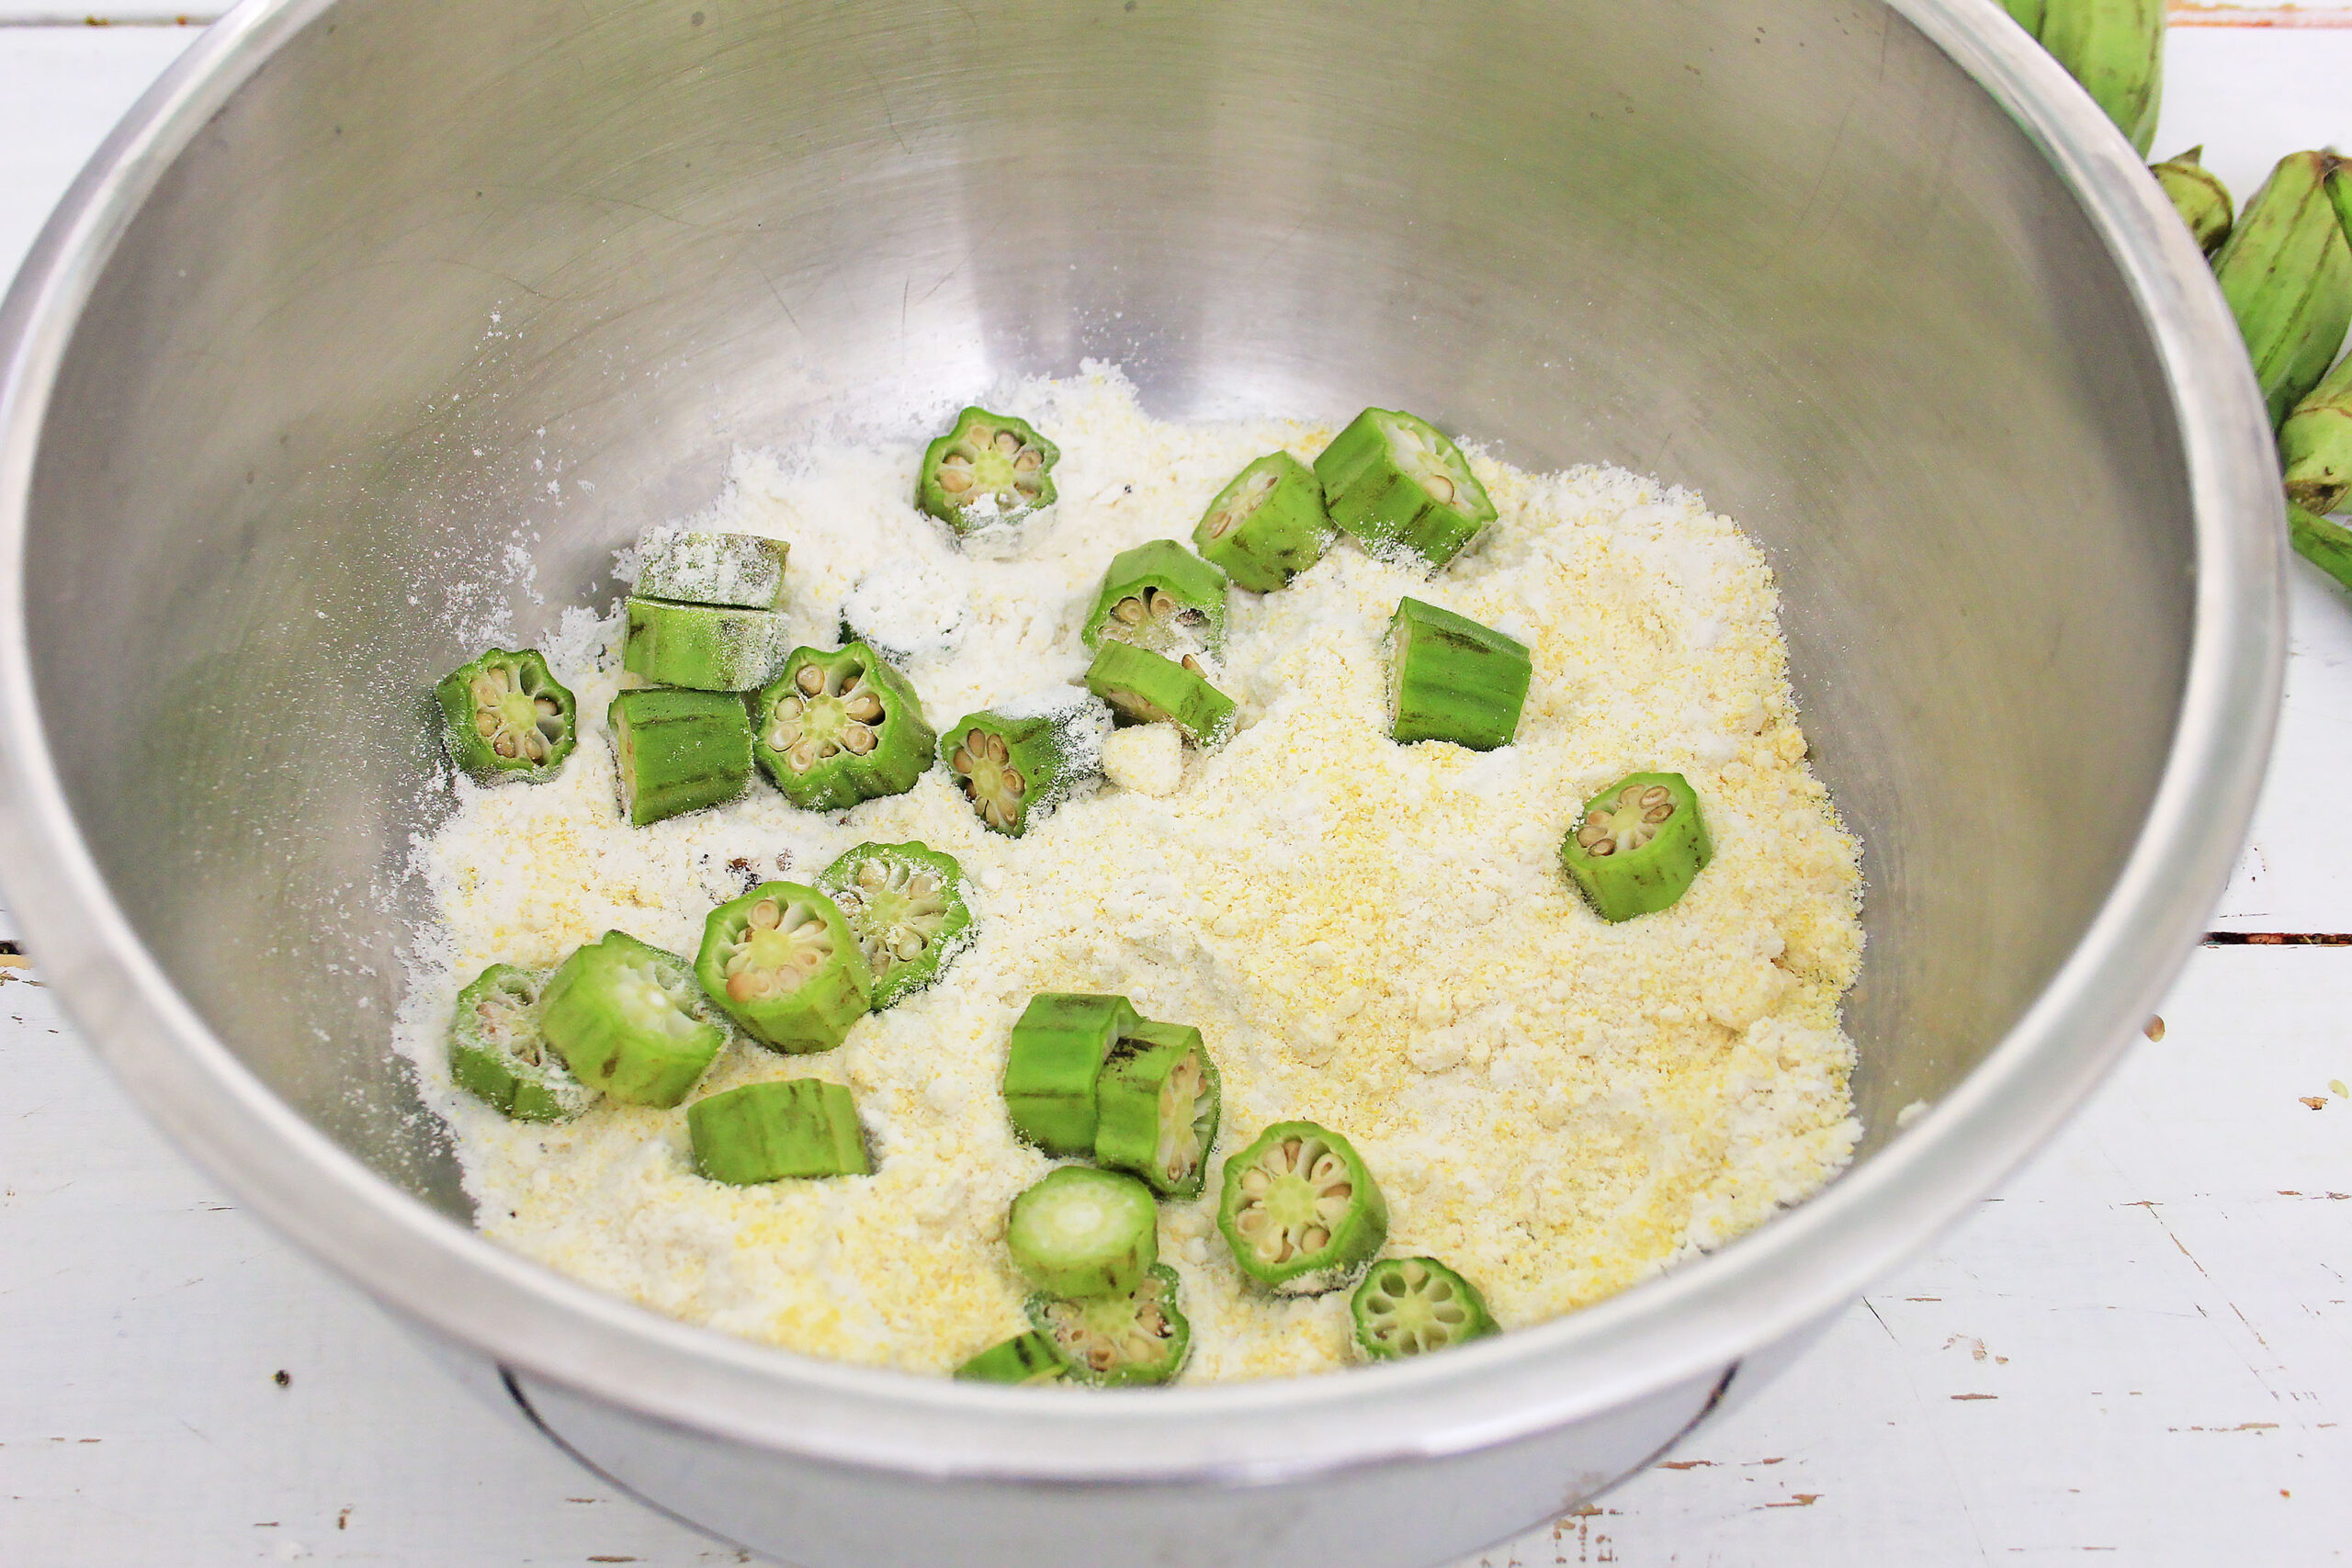 A photo of cut okra being tossed in batter